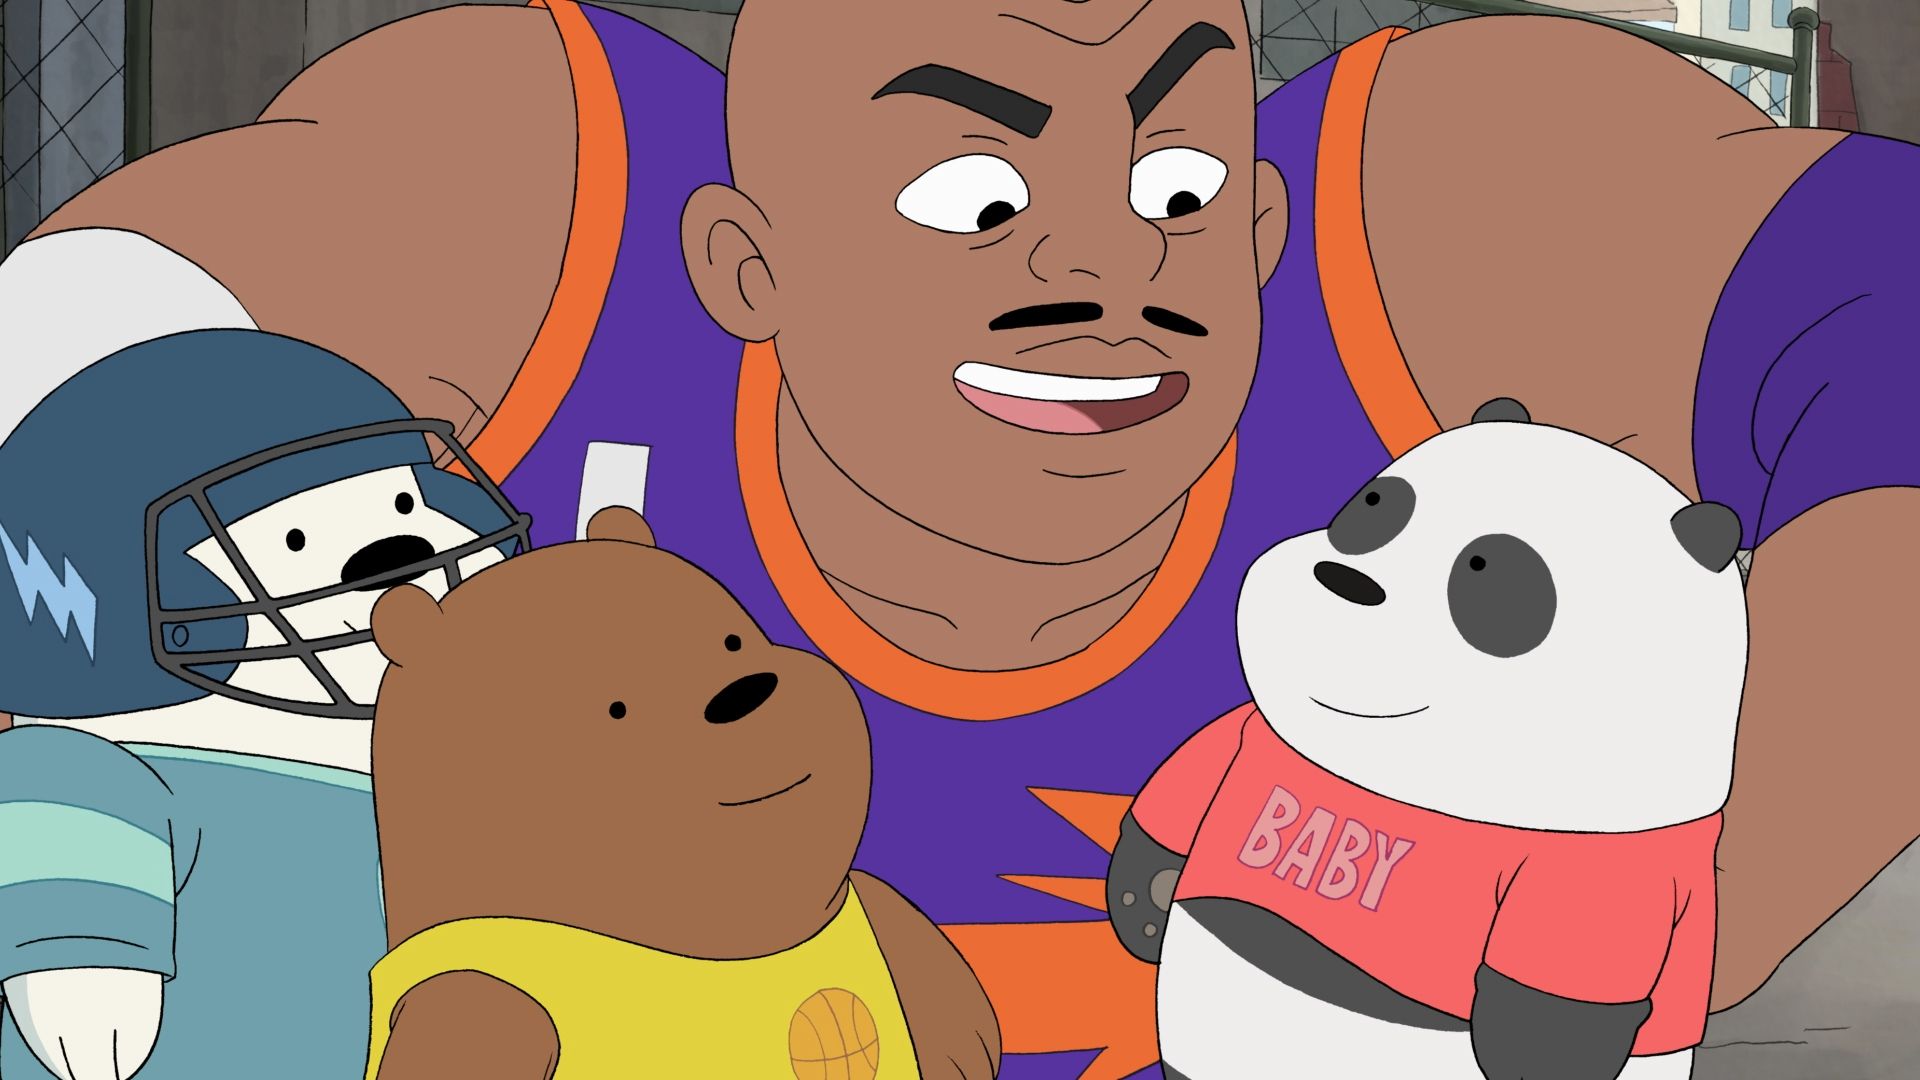 We Bare Bears Exclusive Clip: Charles Barkley and Baby Bears. Den of Geek